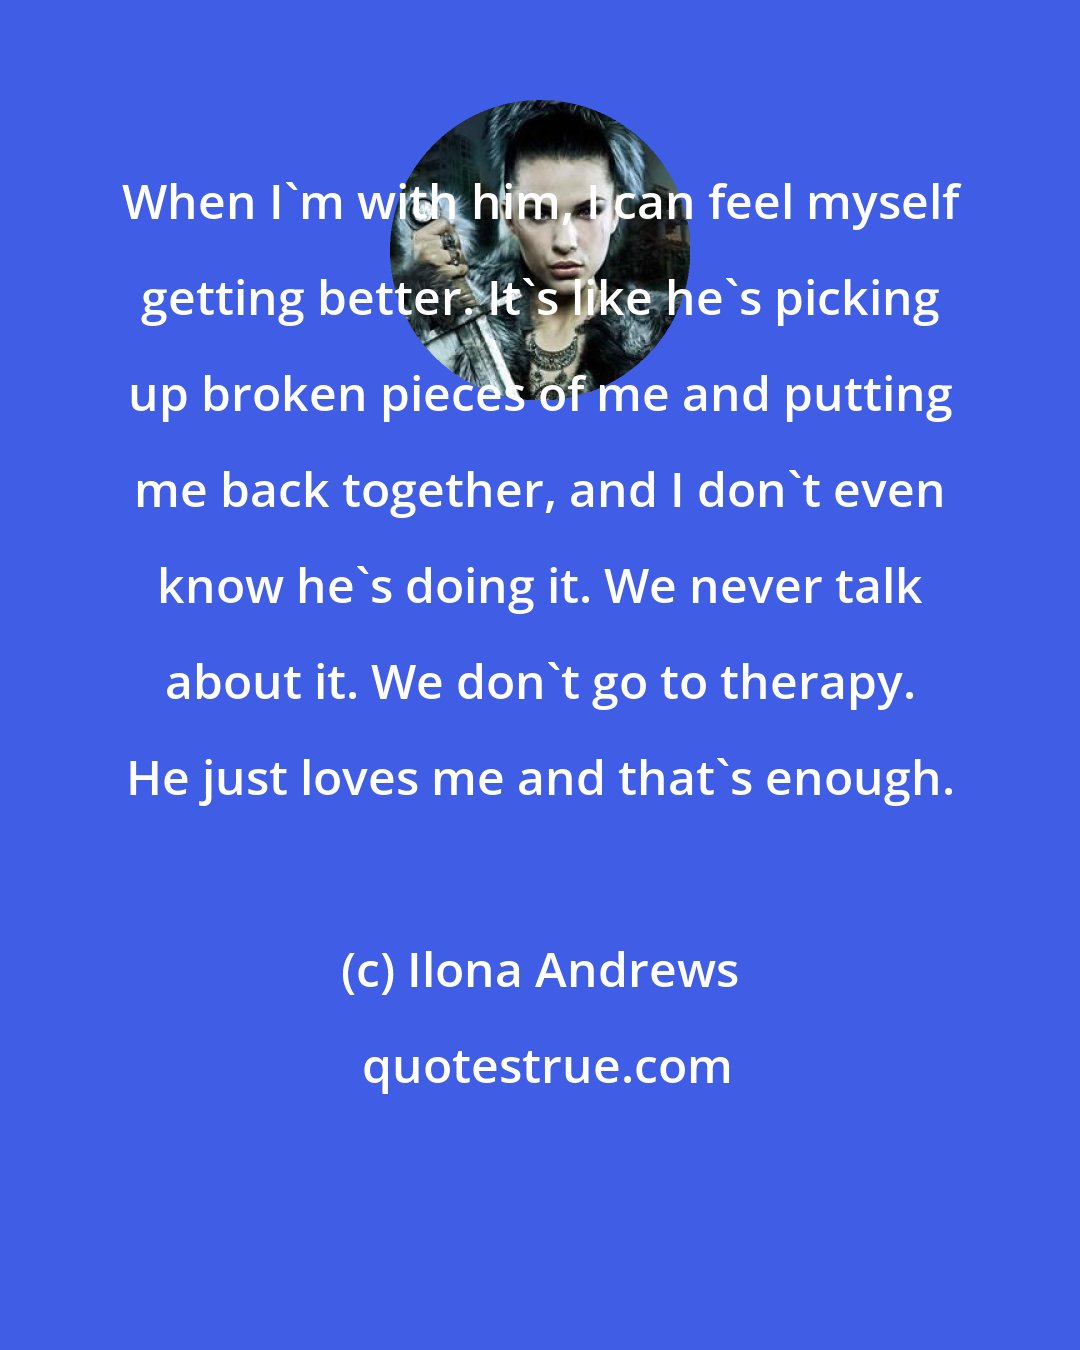 Ilona Andrews: When I'm with him, I can feel myself getting better. It's like he's picking up broken pieces of me and putting me back together, and I don't even know he's doing it. We never talk about it. We don't go to therapy. He just loves me and that's enough.